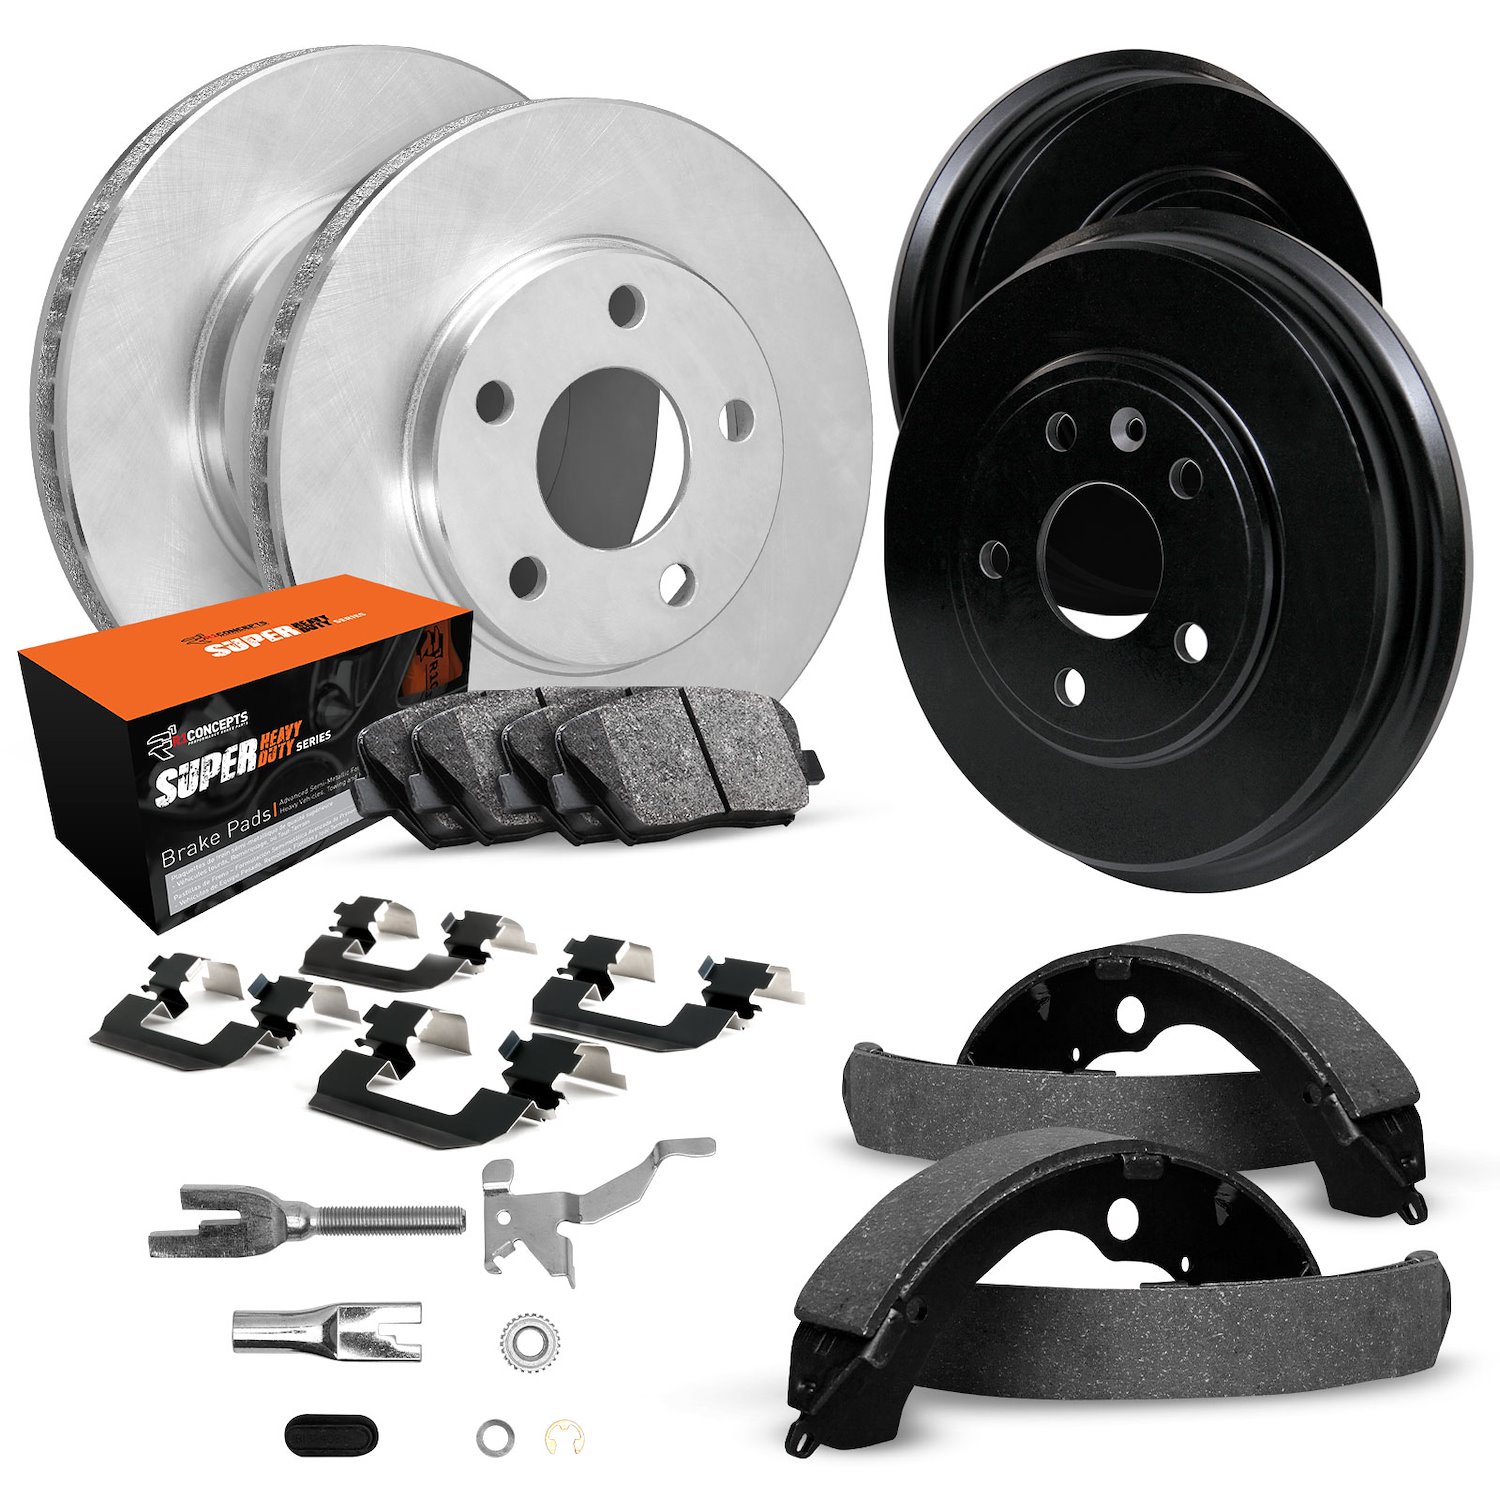 E-Line Blank Brake Rotor & Drum Set w/Super-Duty Pads, Shoes, Hardware, & Adjusters, 1972-1975 GM, Position: Front & Rear